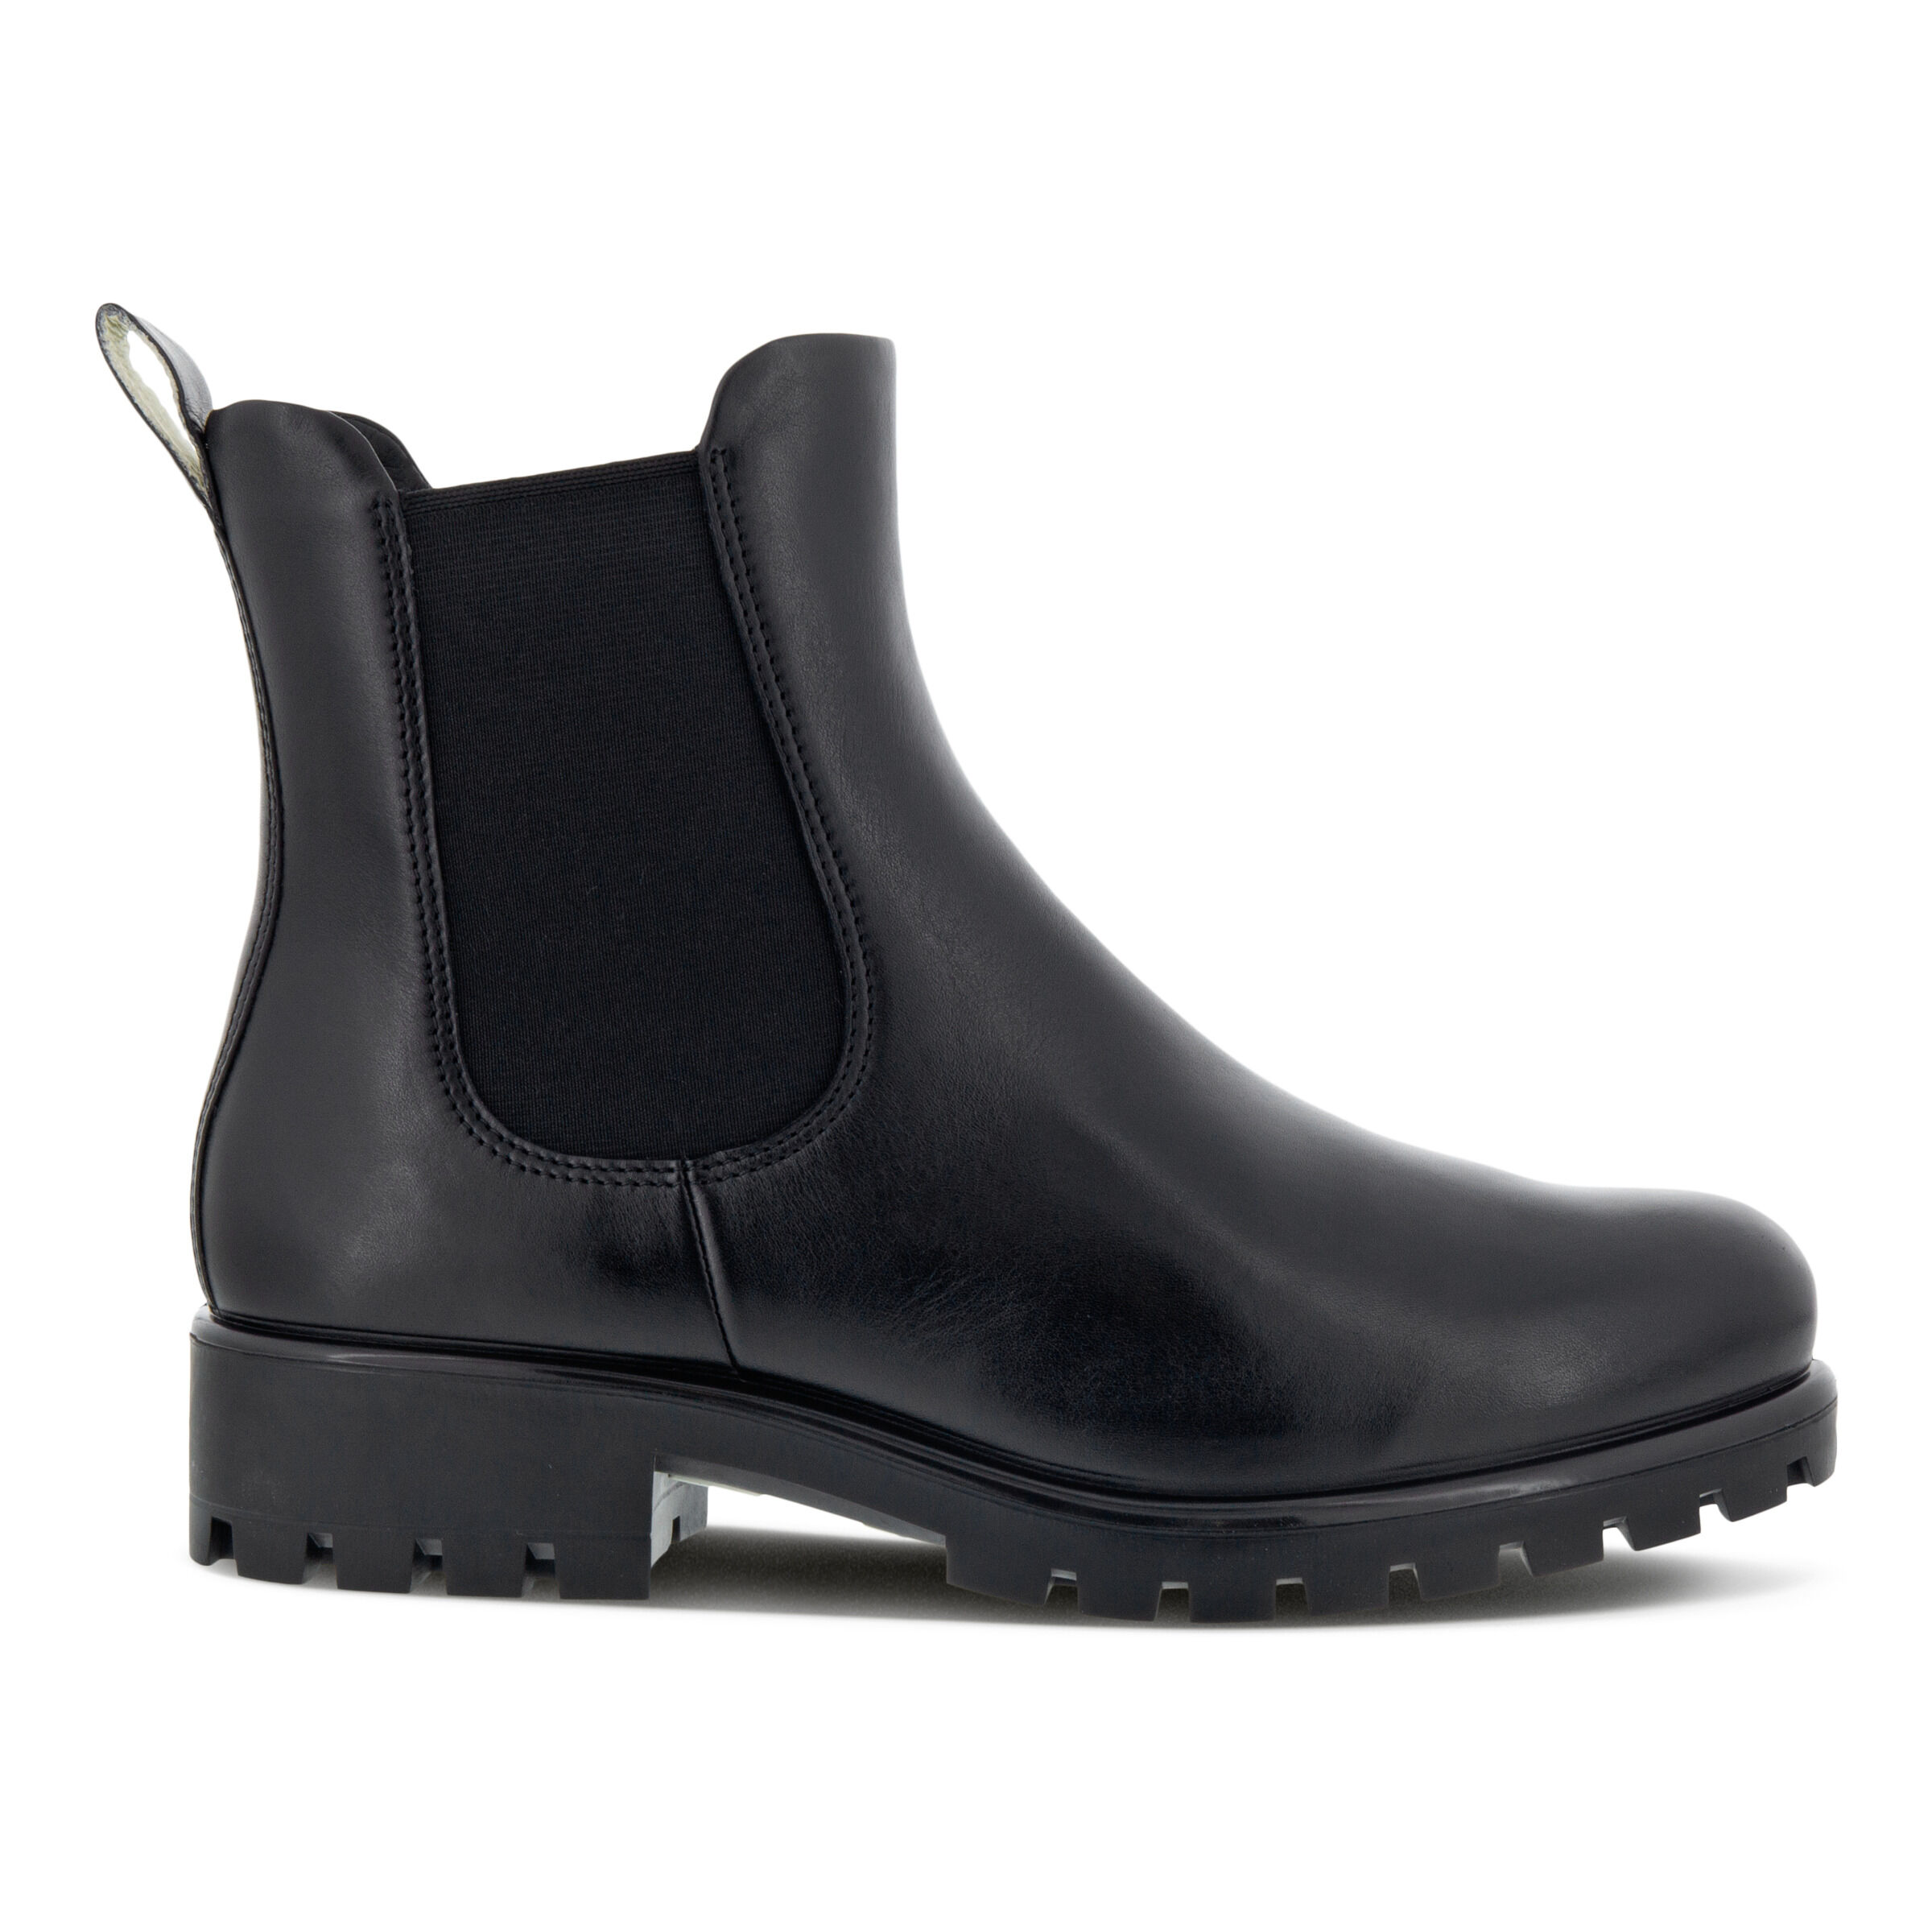 ECCO MODTRAY Boots - Buy Women's Ankle Boots | ECCO®